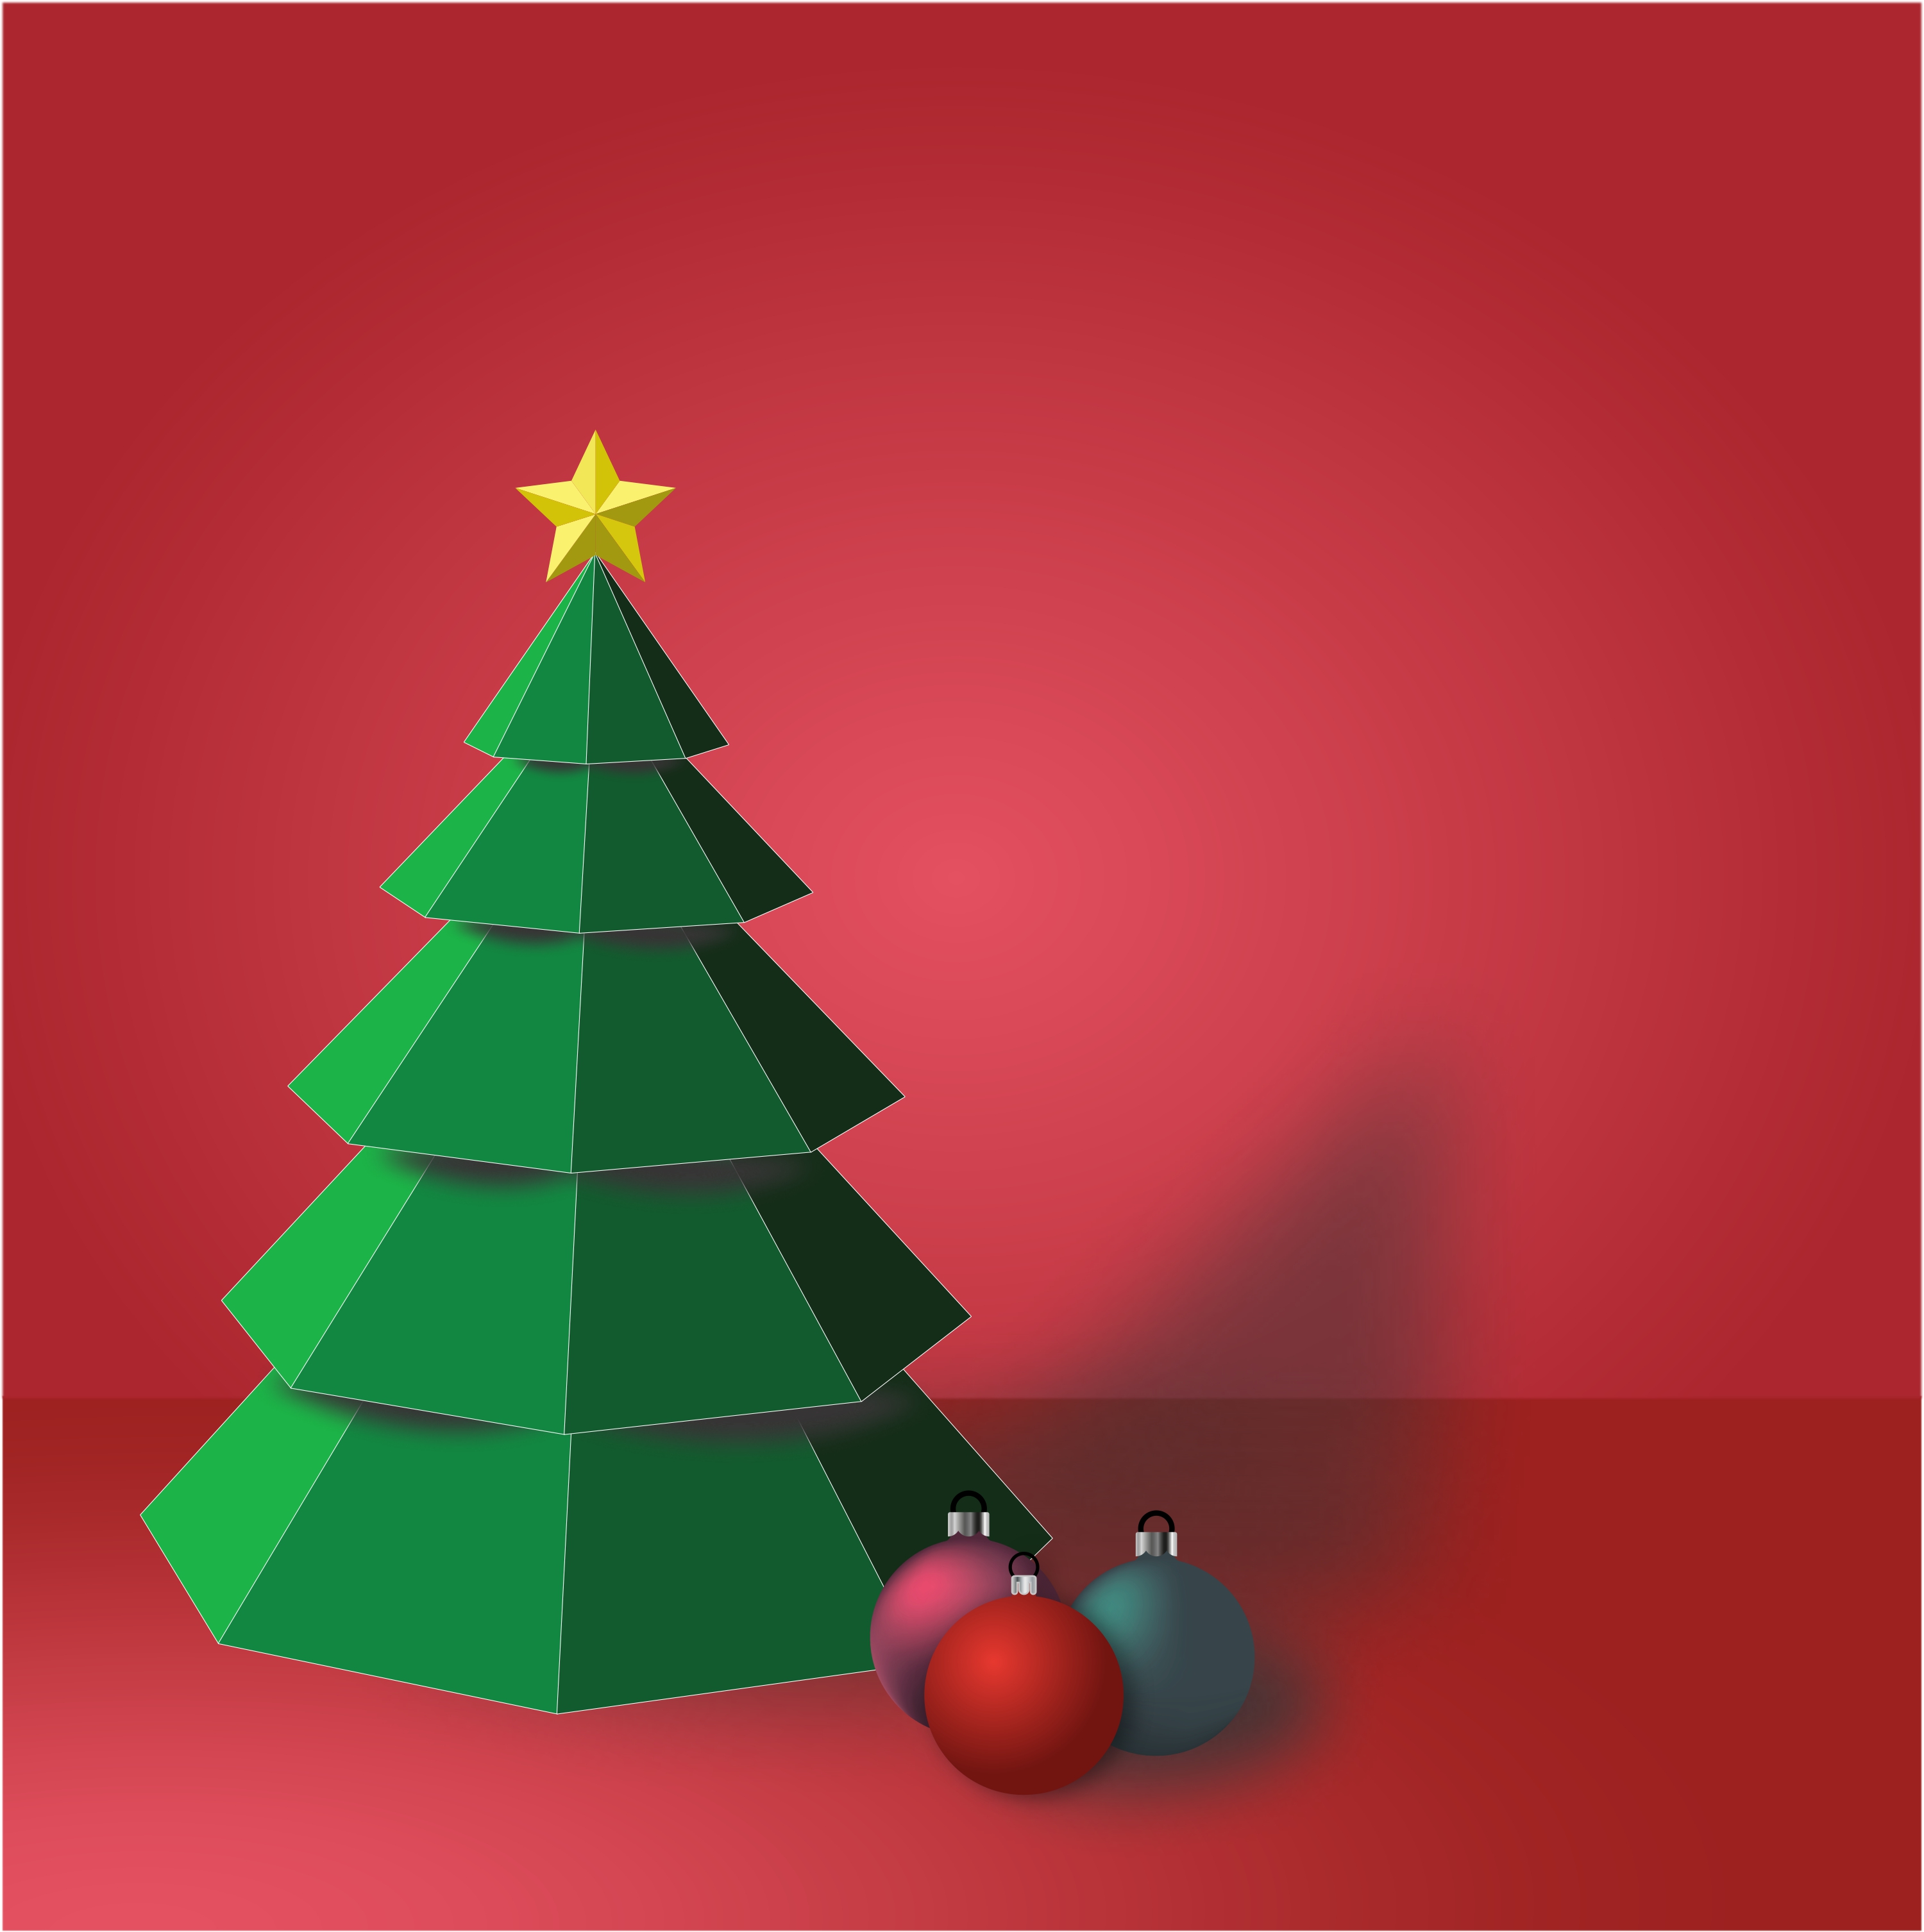 Download Christmas greeting card with x-mas tree on red background, Free  CDR | CorelDraw Design (Download Free CDR, Vector, Stock Images, Tutorials,  Tips & Tricks)